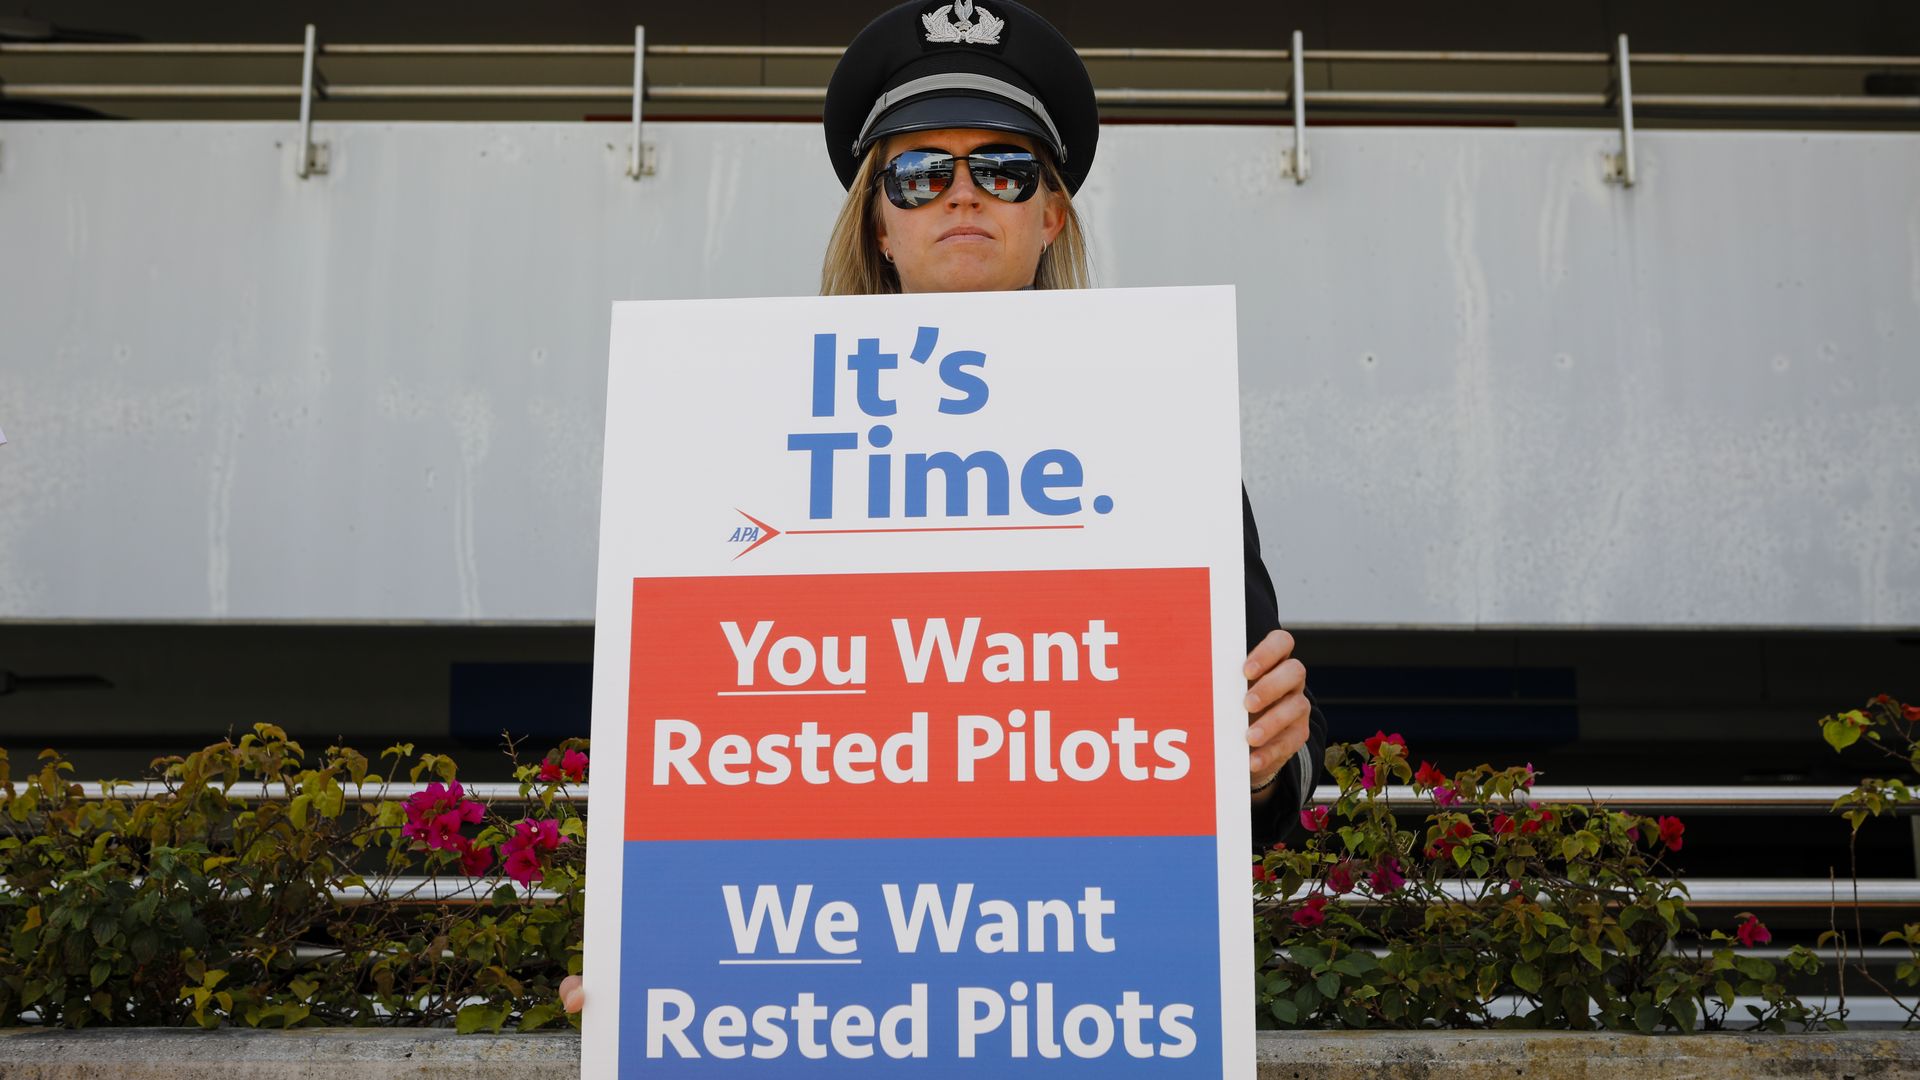 A pilot holding a sign that reads "You Want Rested Pilots/We Want Rested Pilots"